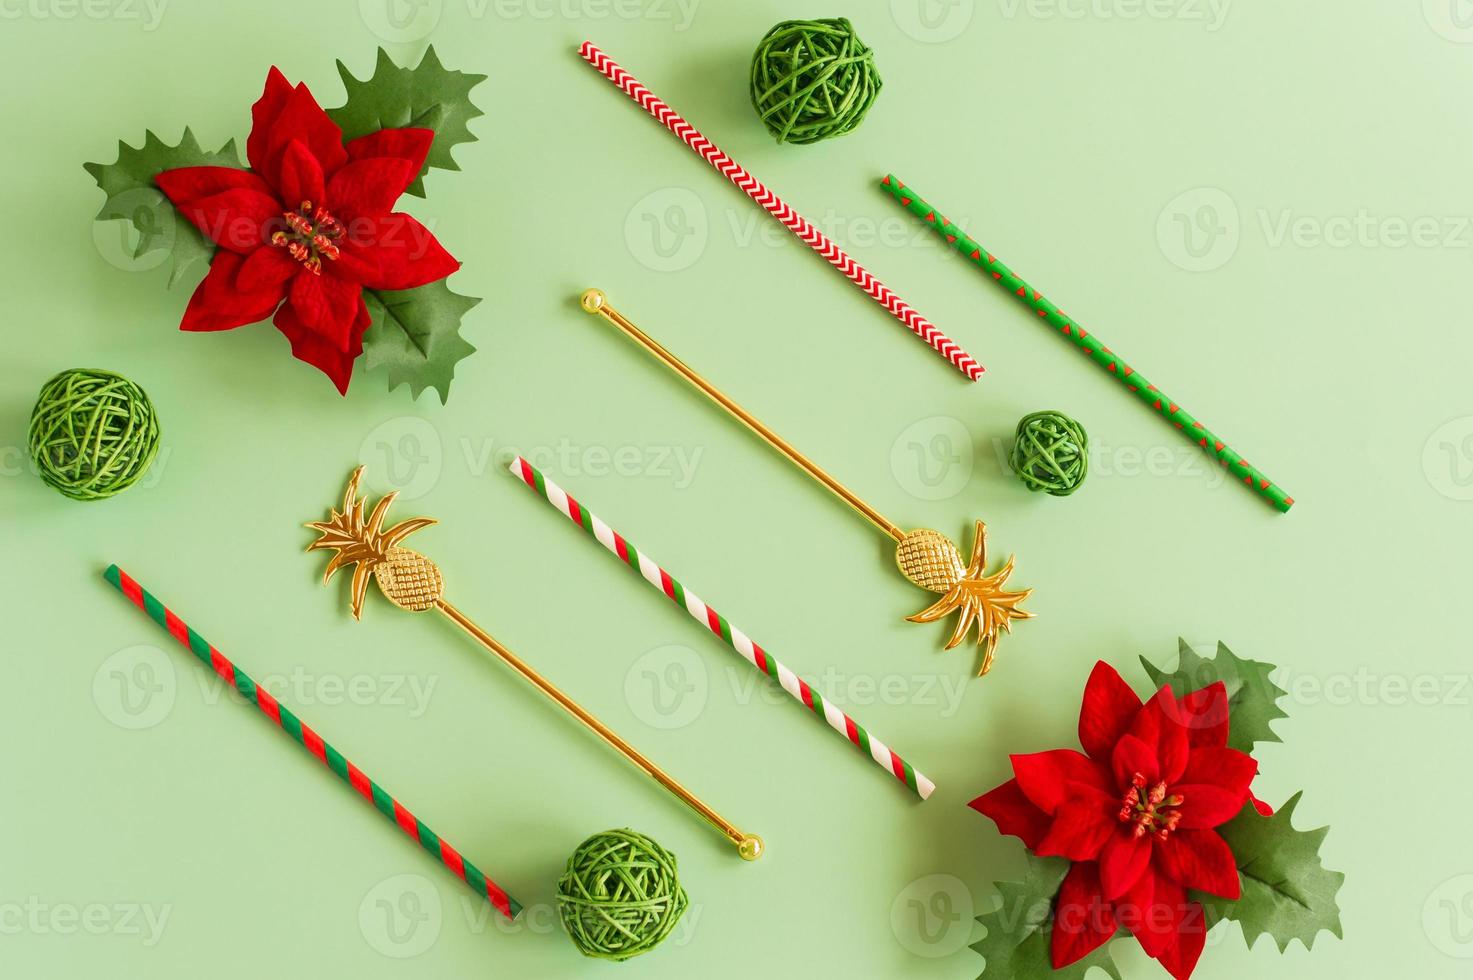 flat layout of New Year's bright cocktail tubes with red flowers- a symbol of the new year and Christmas on a green background. photo